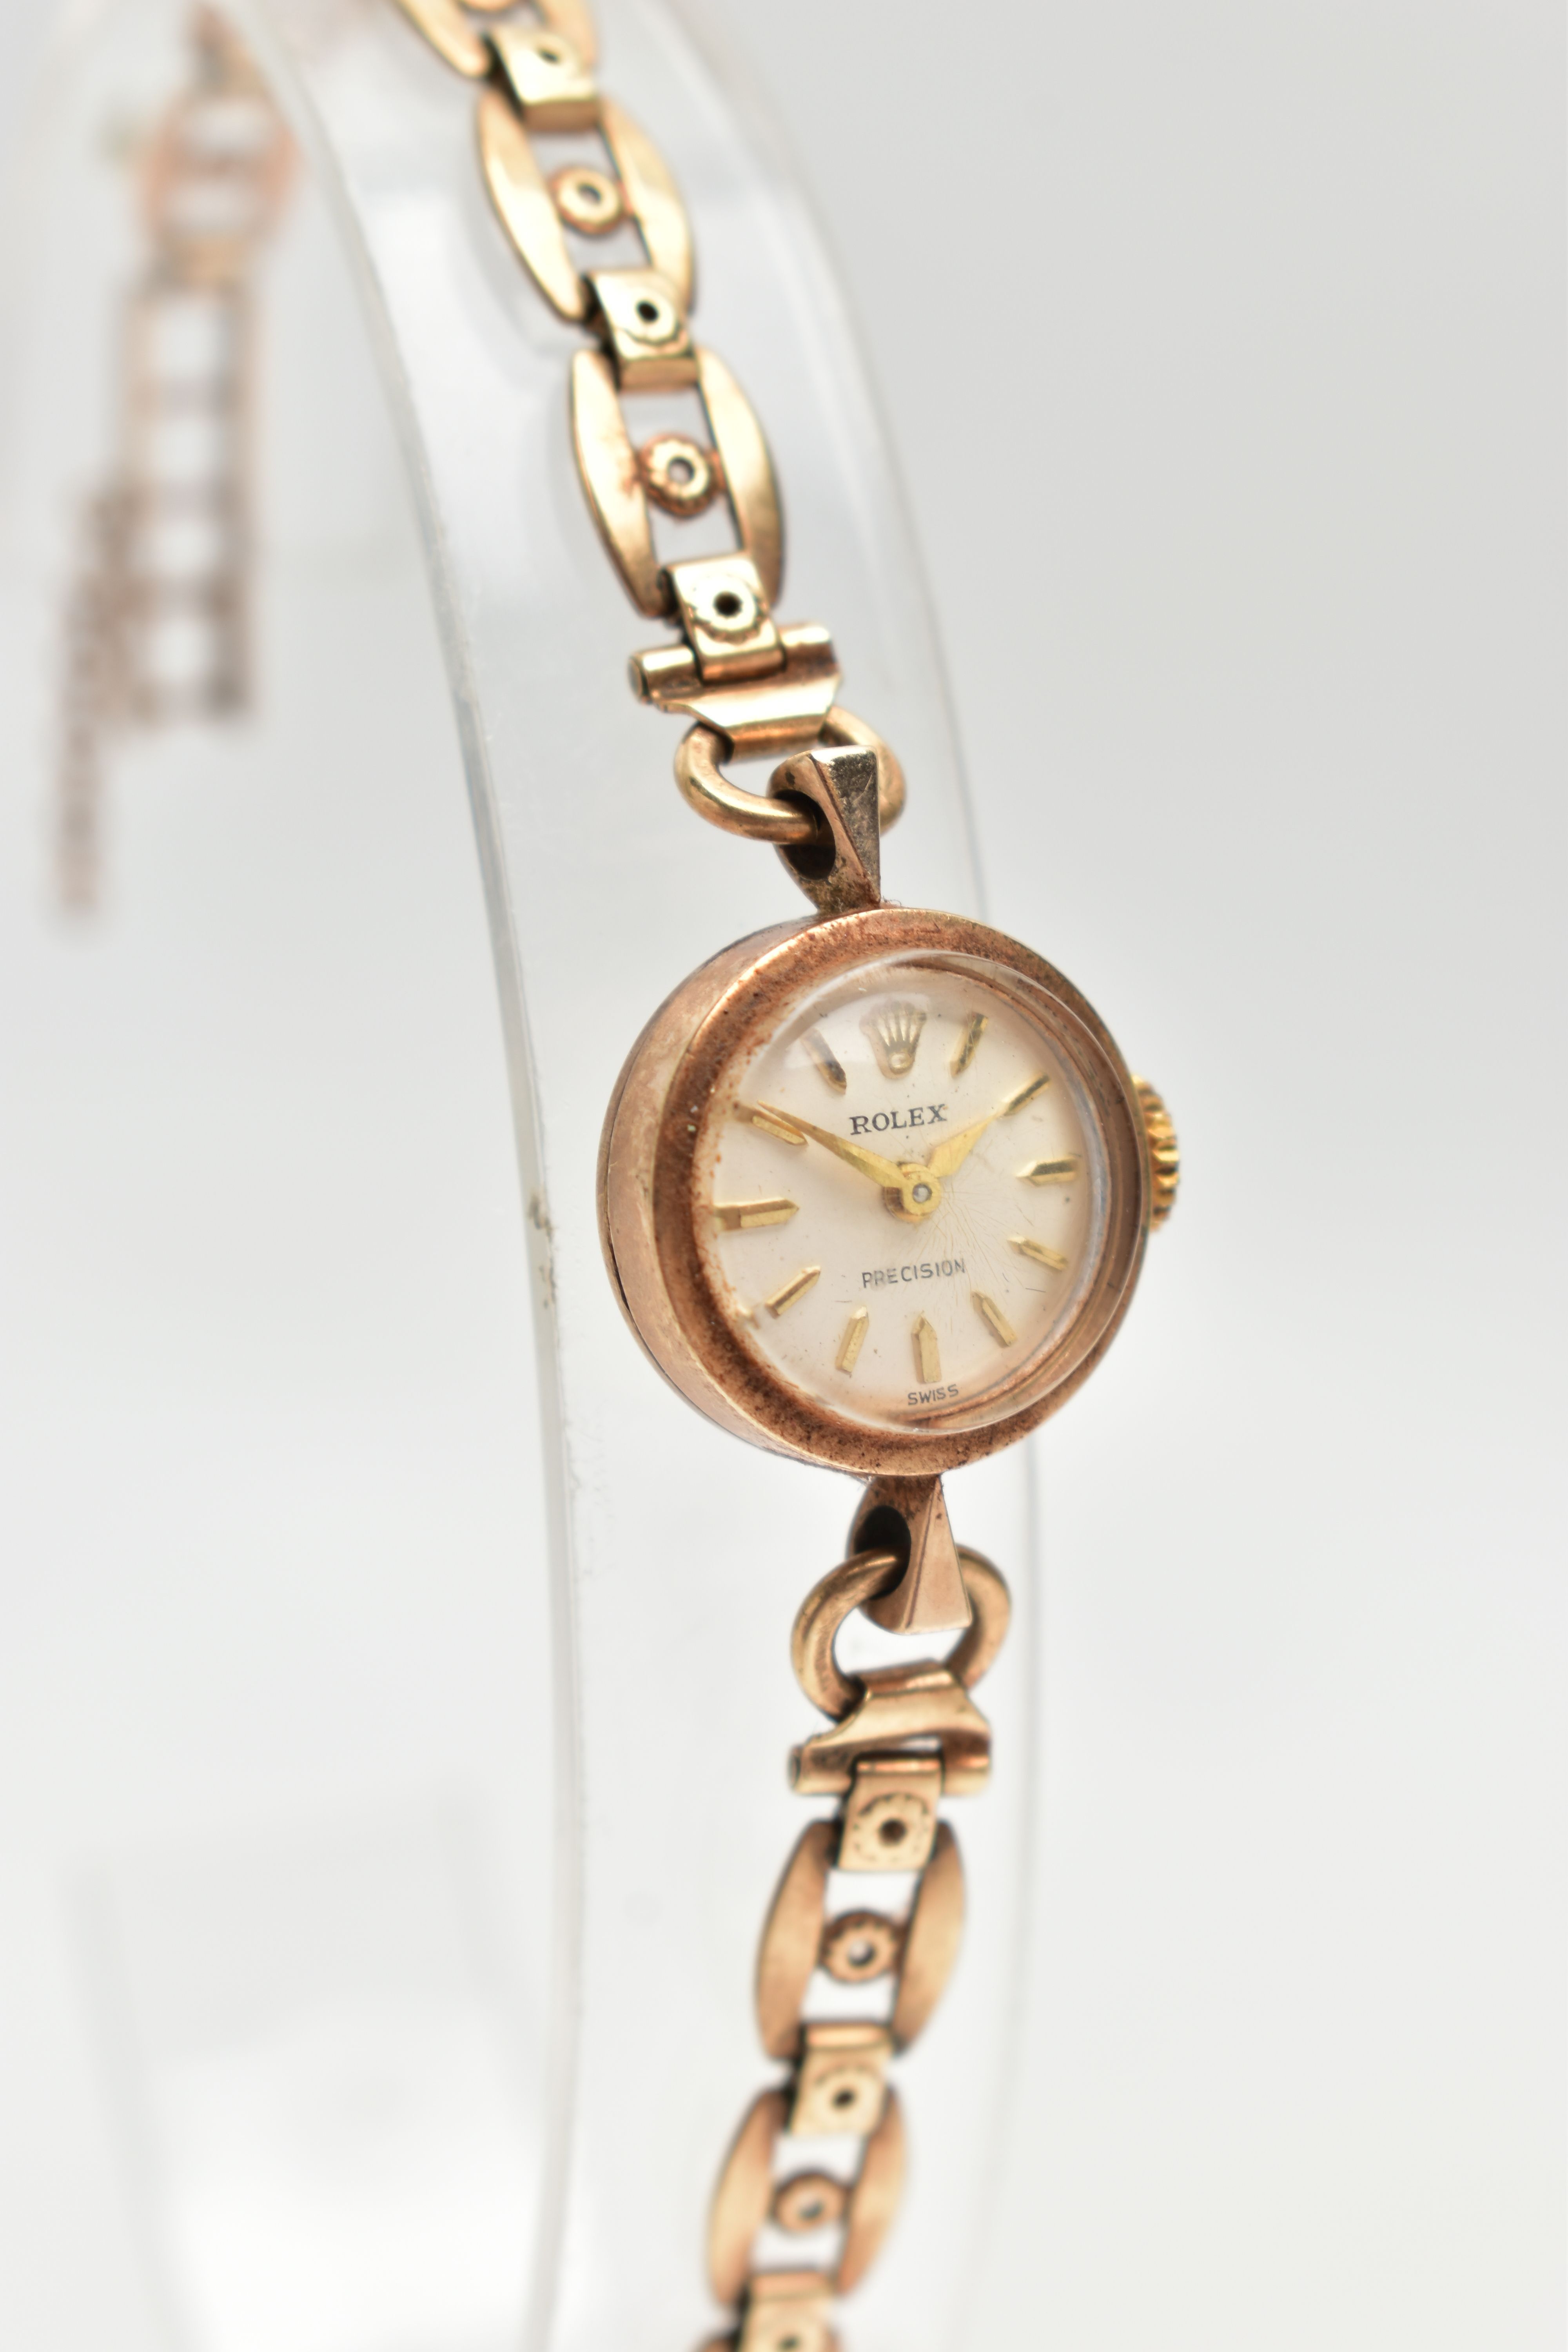 A LADIES 9CT GOLD 'ROLEX' WRISTWATCH, non-running manual wind, silver dial signed 'Rolex Precision', - Image 2 of 6